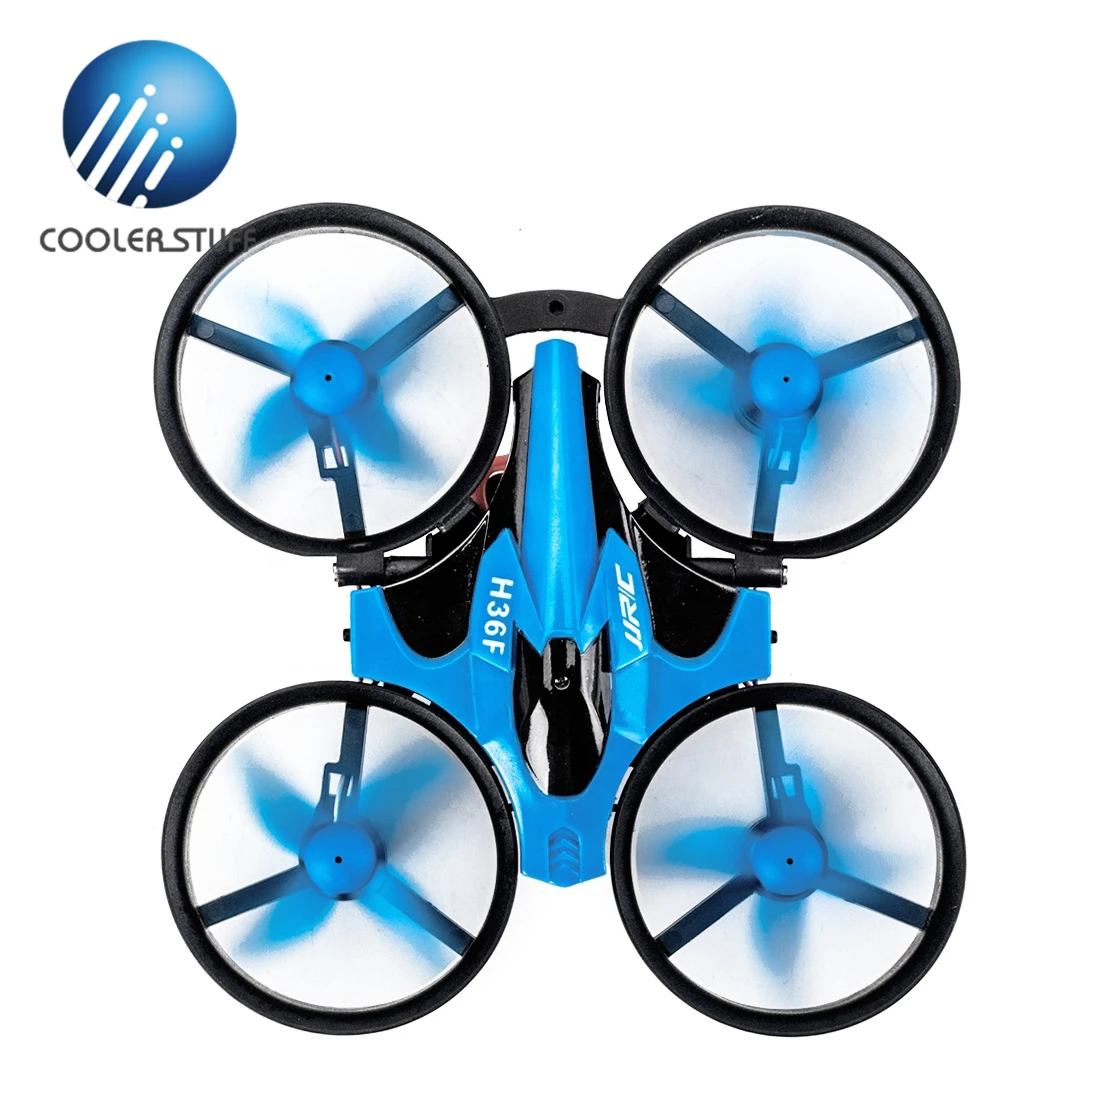 

Dropshipping Coolerstuff JJRC H36 2.4g low price mini drone without camera flying uav rtf remote control quadcopter ufo dron toy